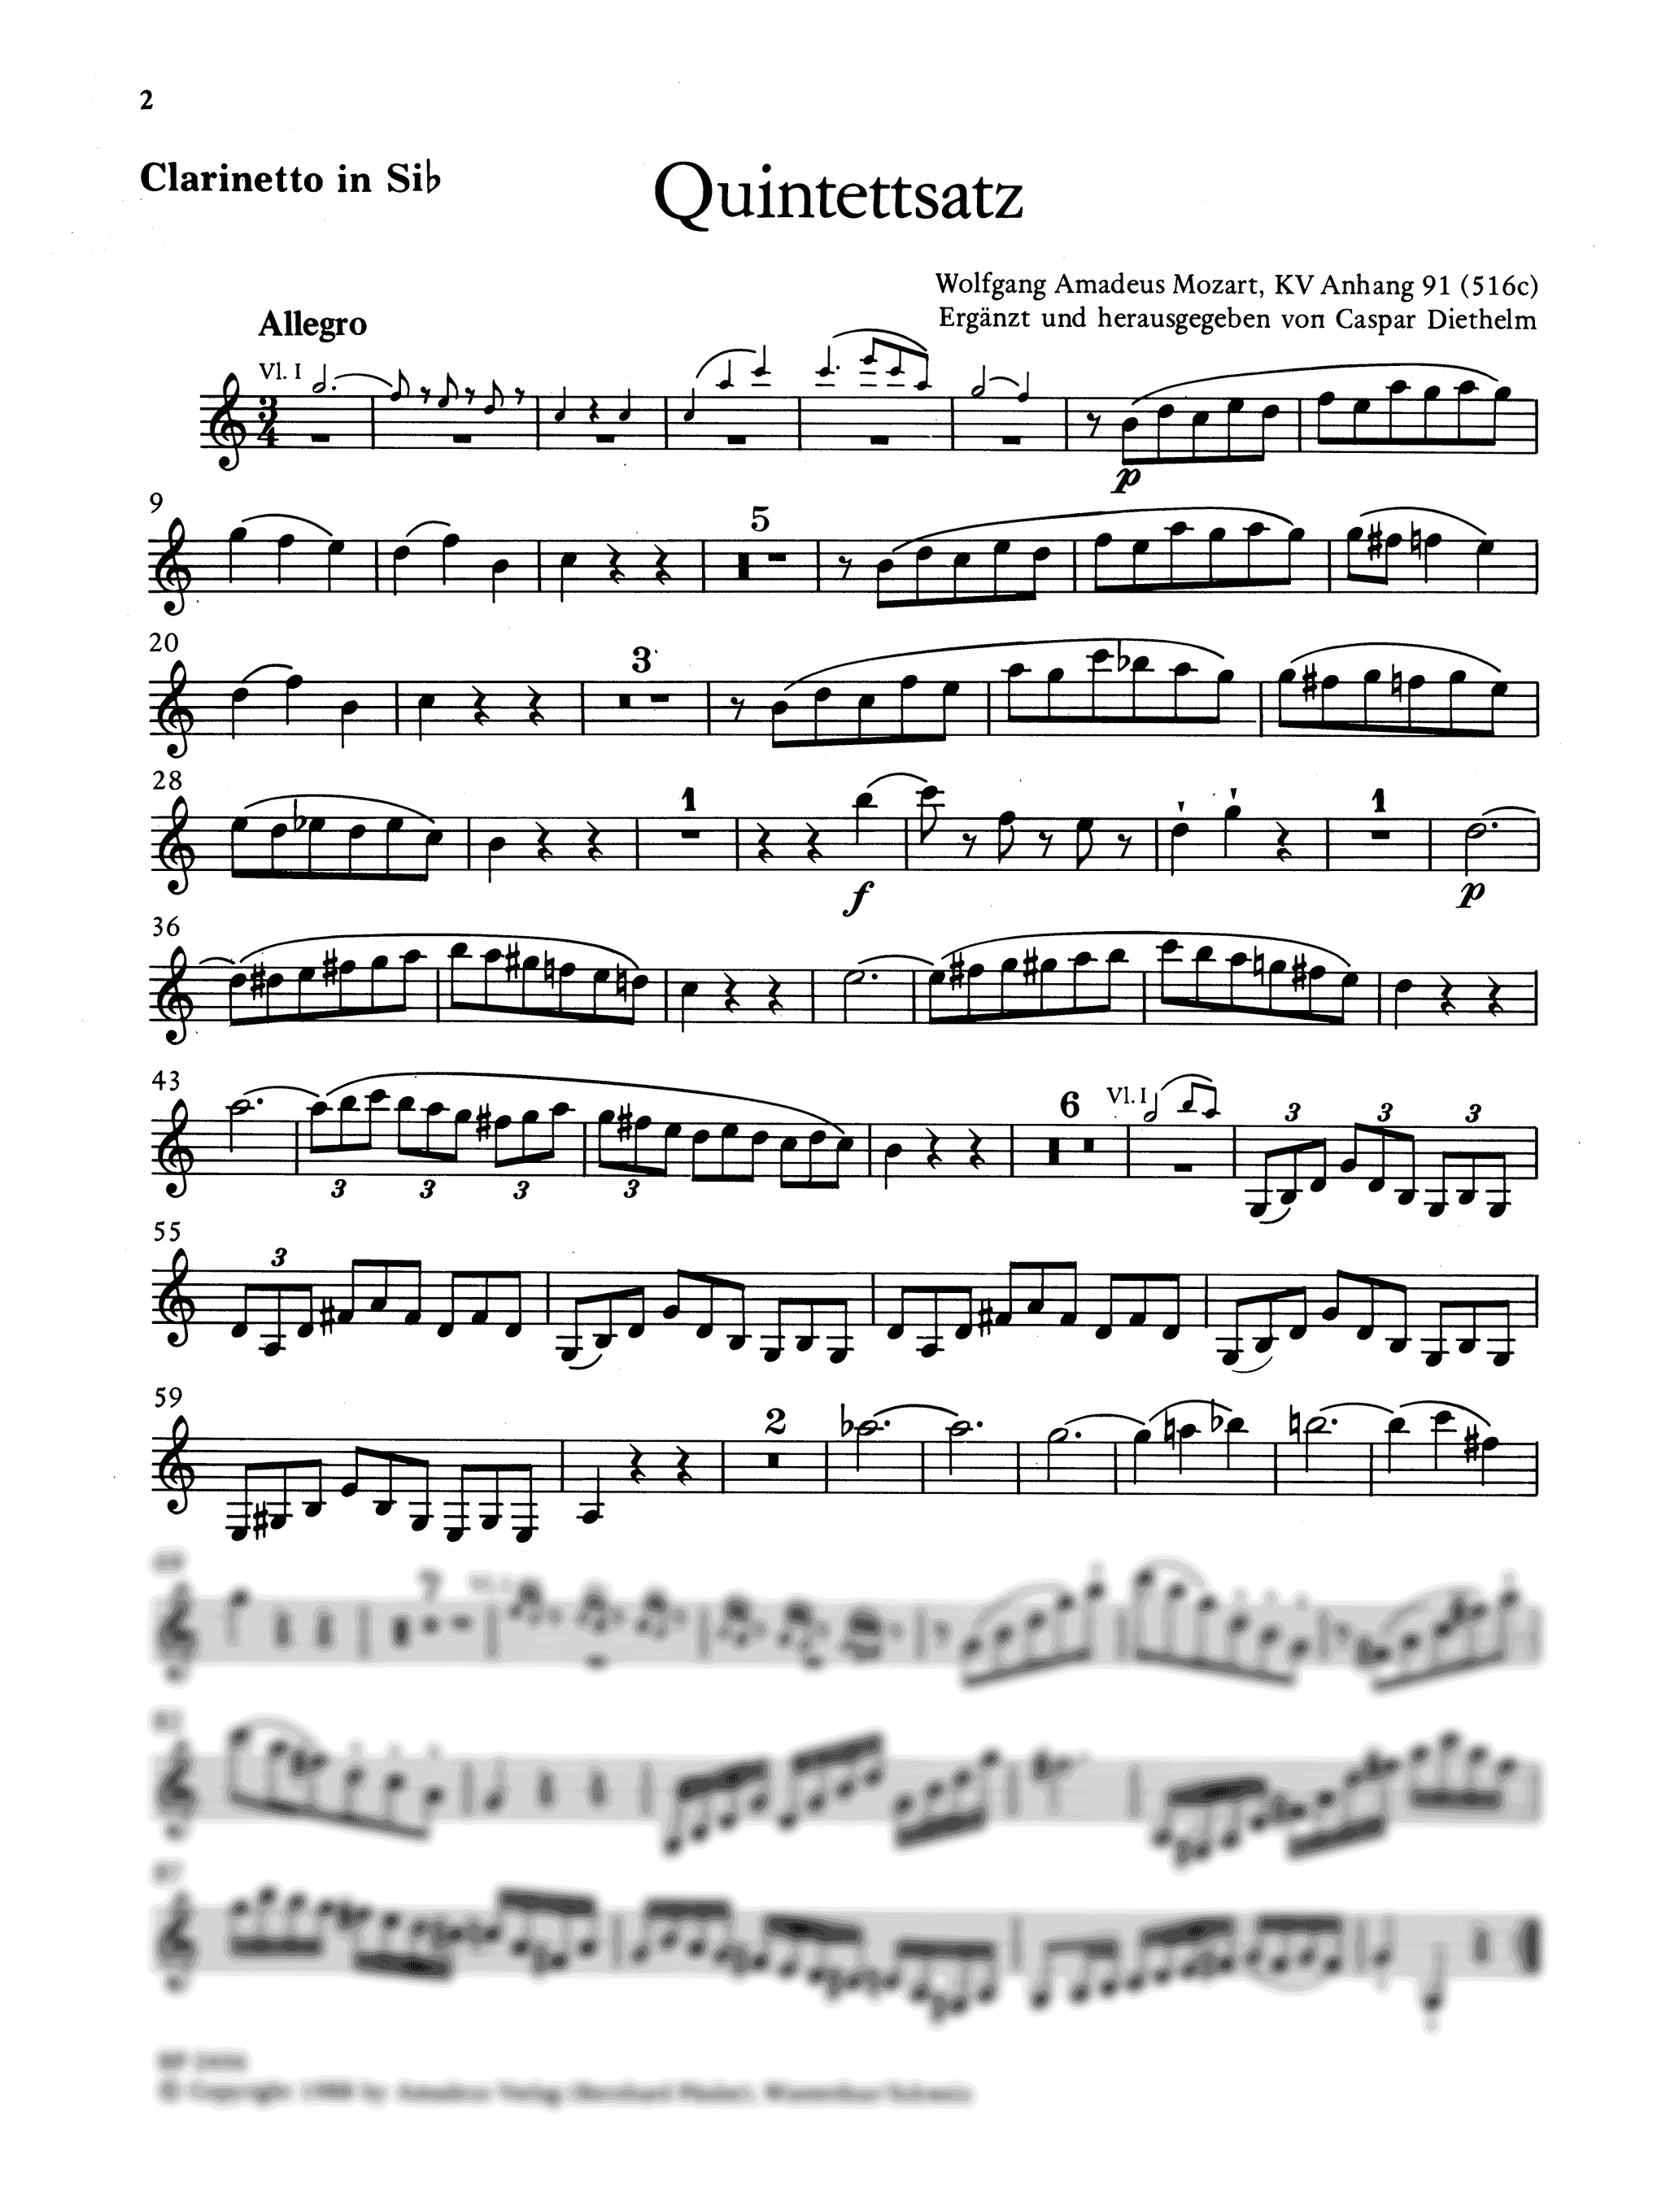 Mozart Clarinet Quintet in B-flat Major (fragment completed by Diethelm), K. Anh. 91/516c solo part